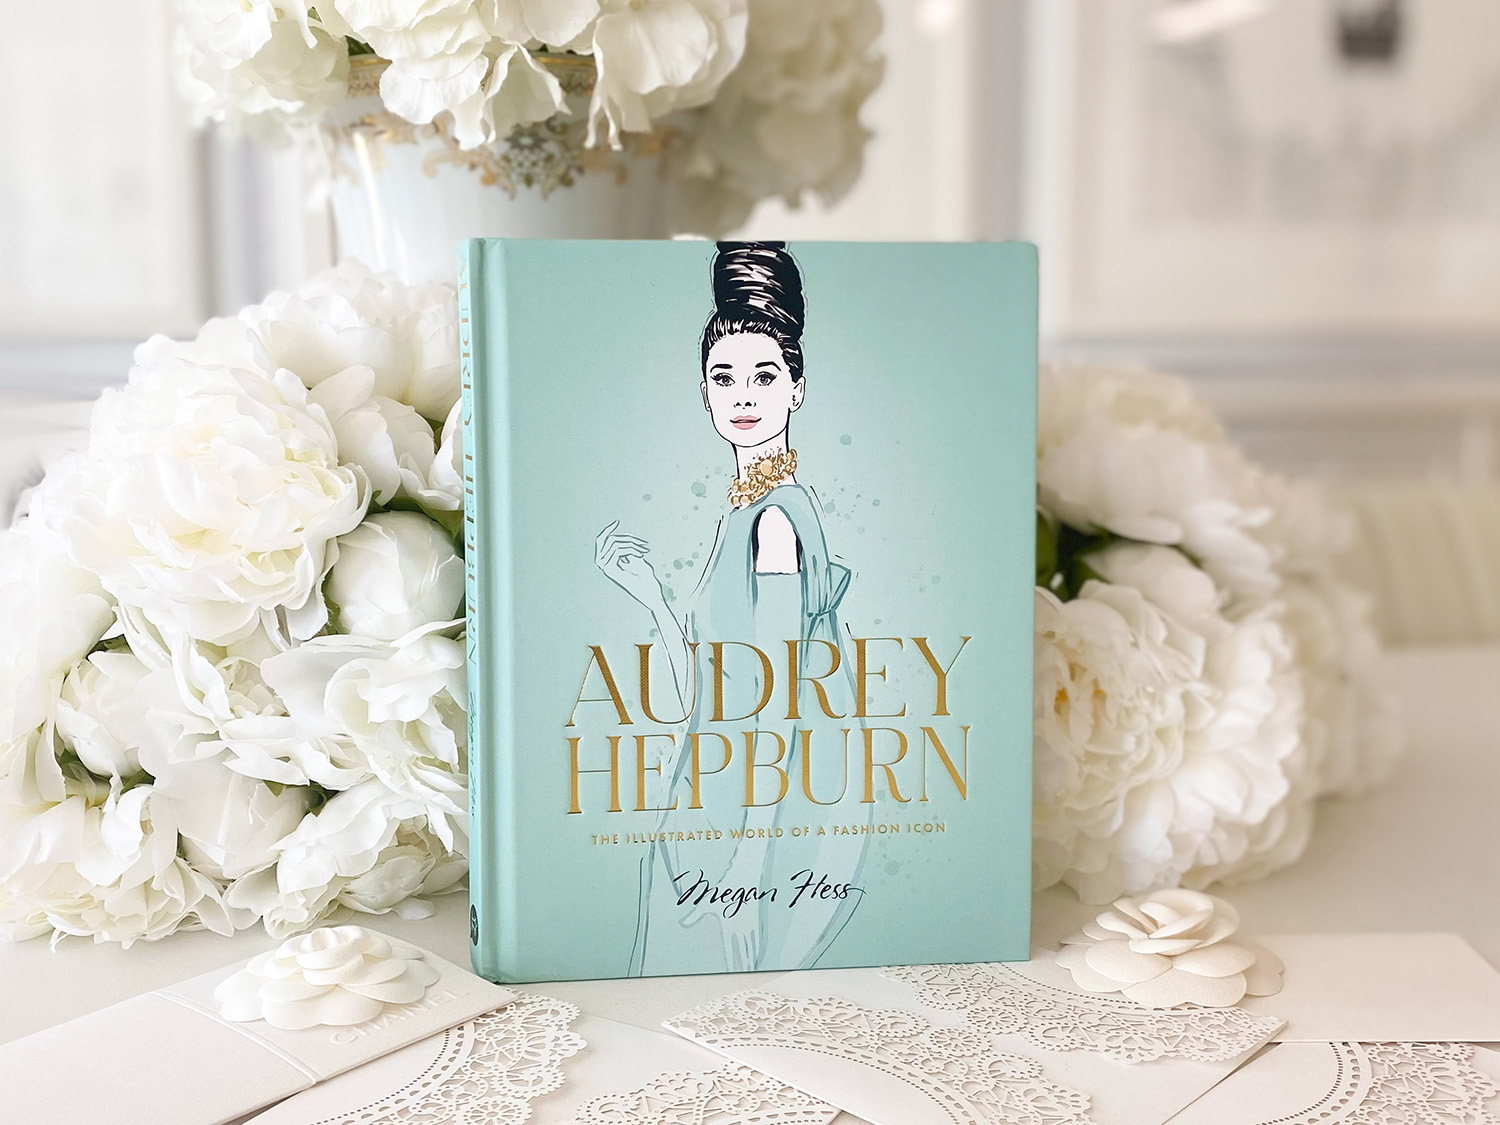 Audrey Hepburn: Icons Of Style, For Fans Of Megan Hess, The Little Booksof  Fashion And The Complete Catwalk Collections - By Harper By Design : Target